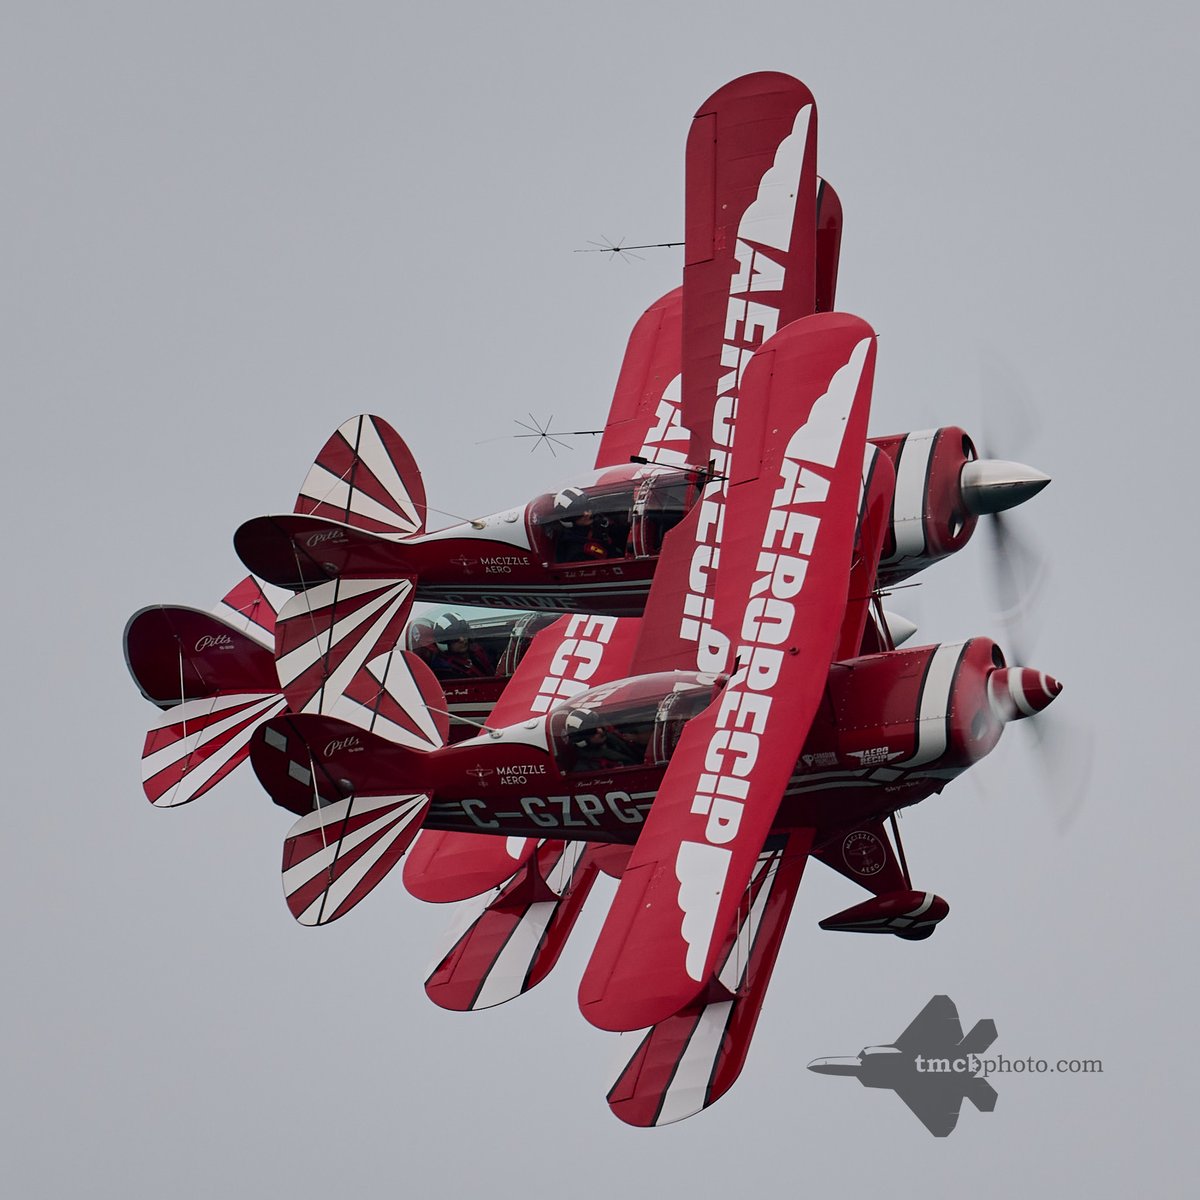 It isn't every day you come across an echelon in review where all pilots are visible early in the formation, but the Northern Stars Aeroteam pulled that off over the skies of @CIASToronto last season and it looks pretty cool!
#northernstarsaeroteam
#northernstars 
#pittsspecial